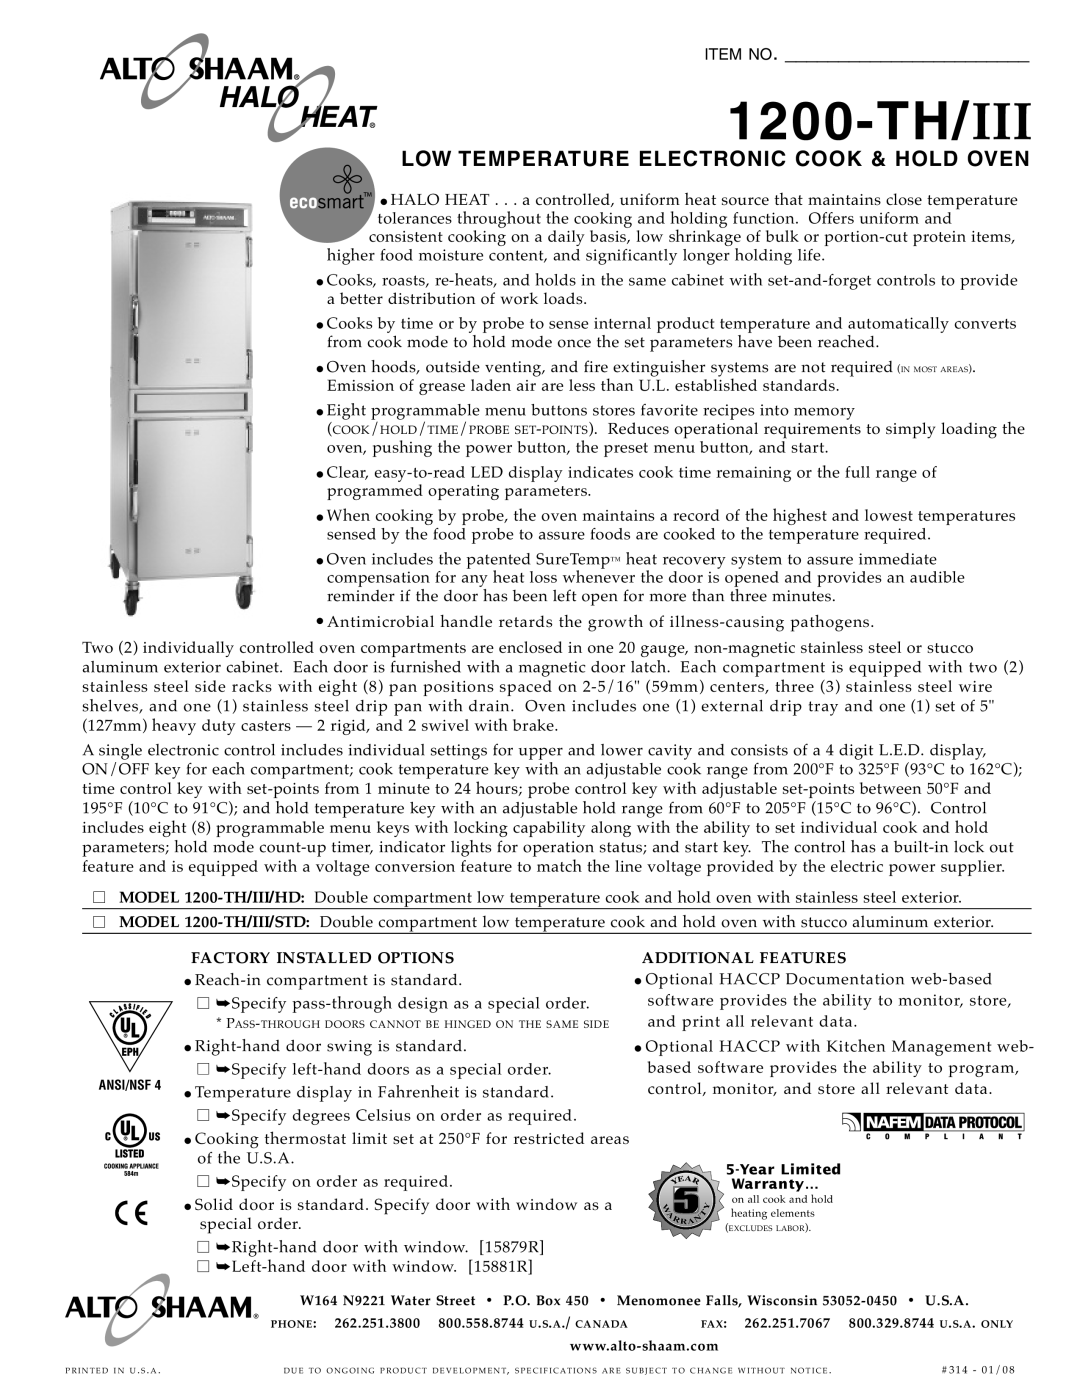 Alto-Shaam warranty 1200- TH, Low Temperature Electronic Cook & Hold Oven, Item No, MODEL 1200-TH/III/HD 